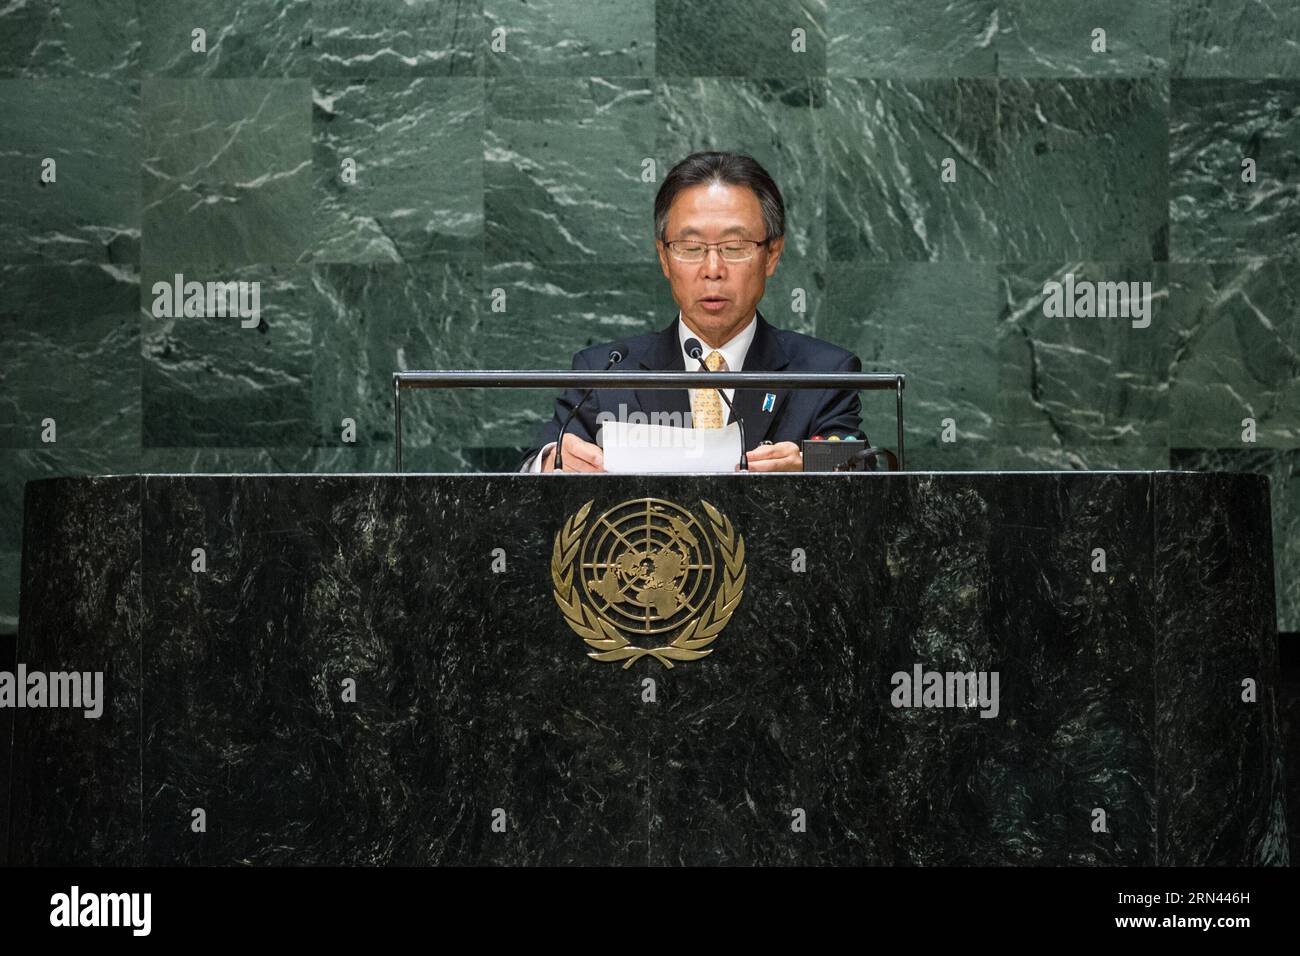 (150505) -- NEW YORK, May 5, 2015 -- Motohide Yoshikawa, Japan s permanent representative to the United Nations, speaks during a UN General Assembly s special meeting to commemorate all victims of WWII at the UN headquarters in New York on May 5, 2015. A UN General Assembly (GA) special meeting kicked off here on Tuesday to commemorate victims of the Second World War. ) UN-NEW YORK-WWII-COMMEMORATION LixMuzi PUBLICATIONxNOTxINxCHN   New York May 5 2015 Motohide Yoshikawa Japan S permanently Representative to The United Nations Speaks during a UN General Assembly S Special Meeting to commemorat Stock Photo